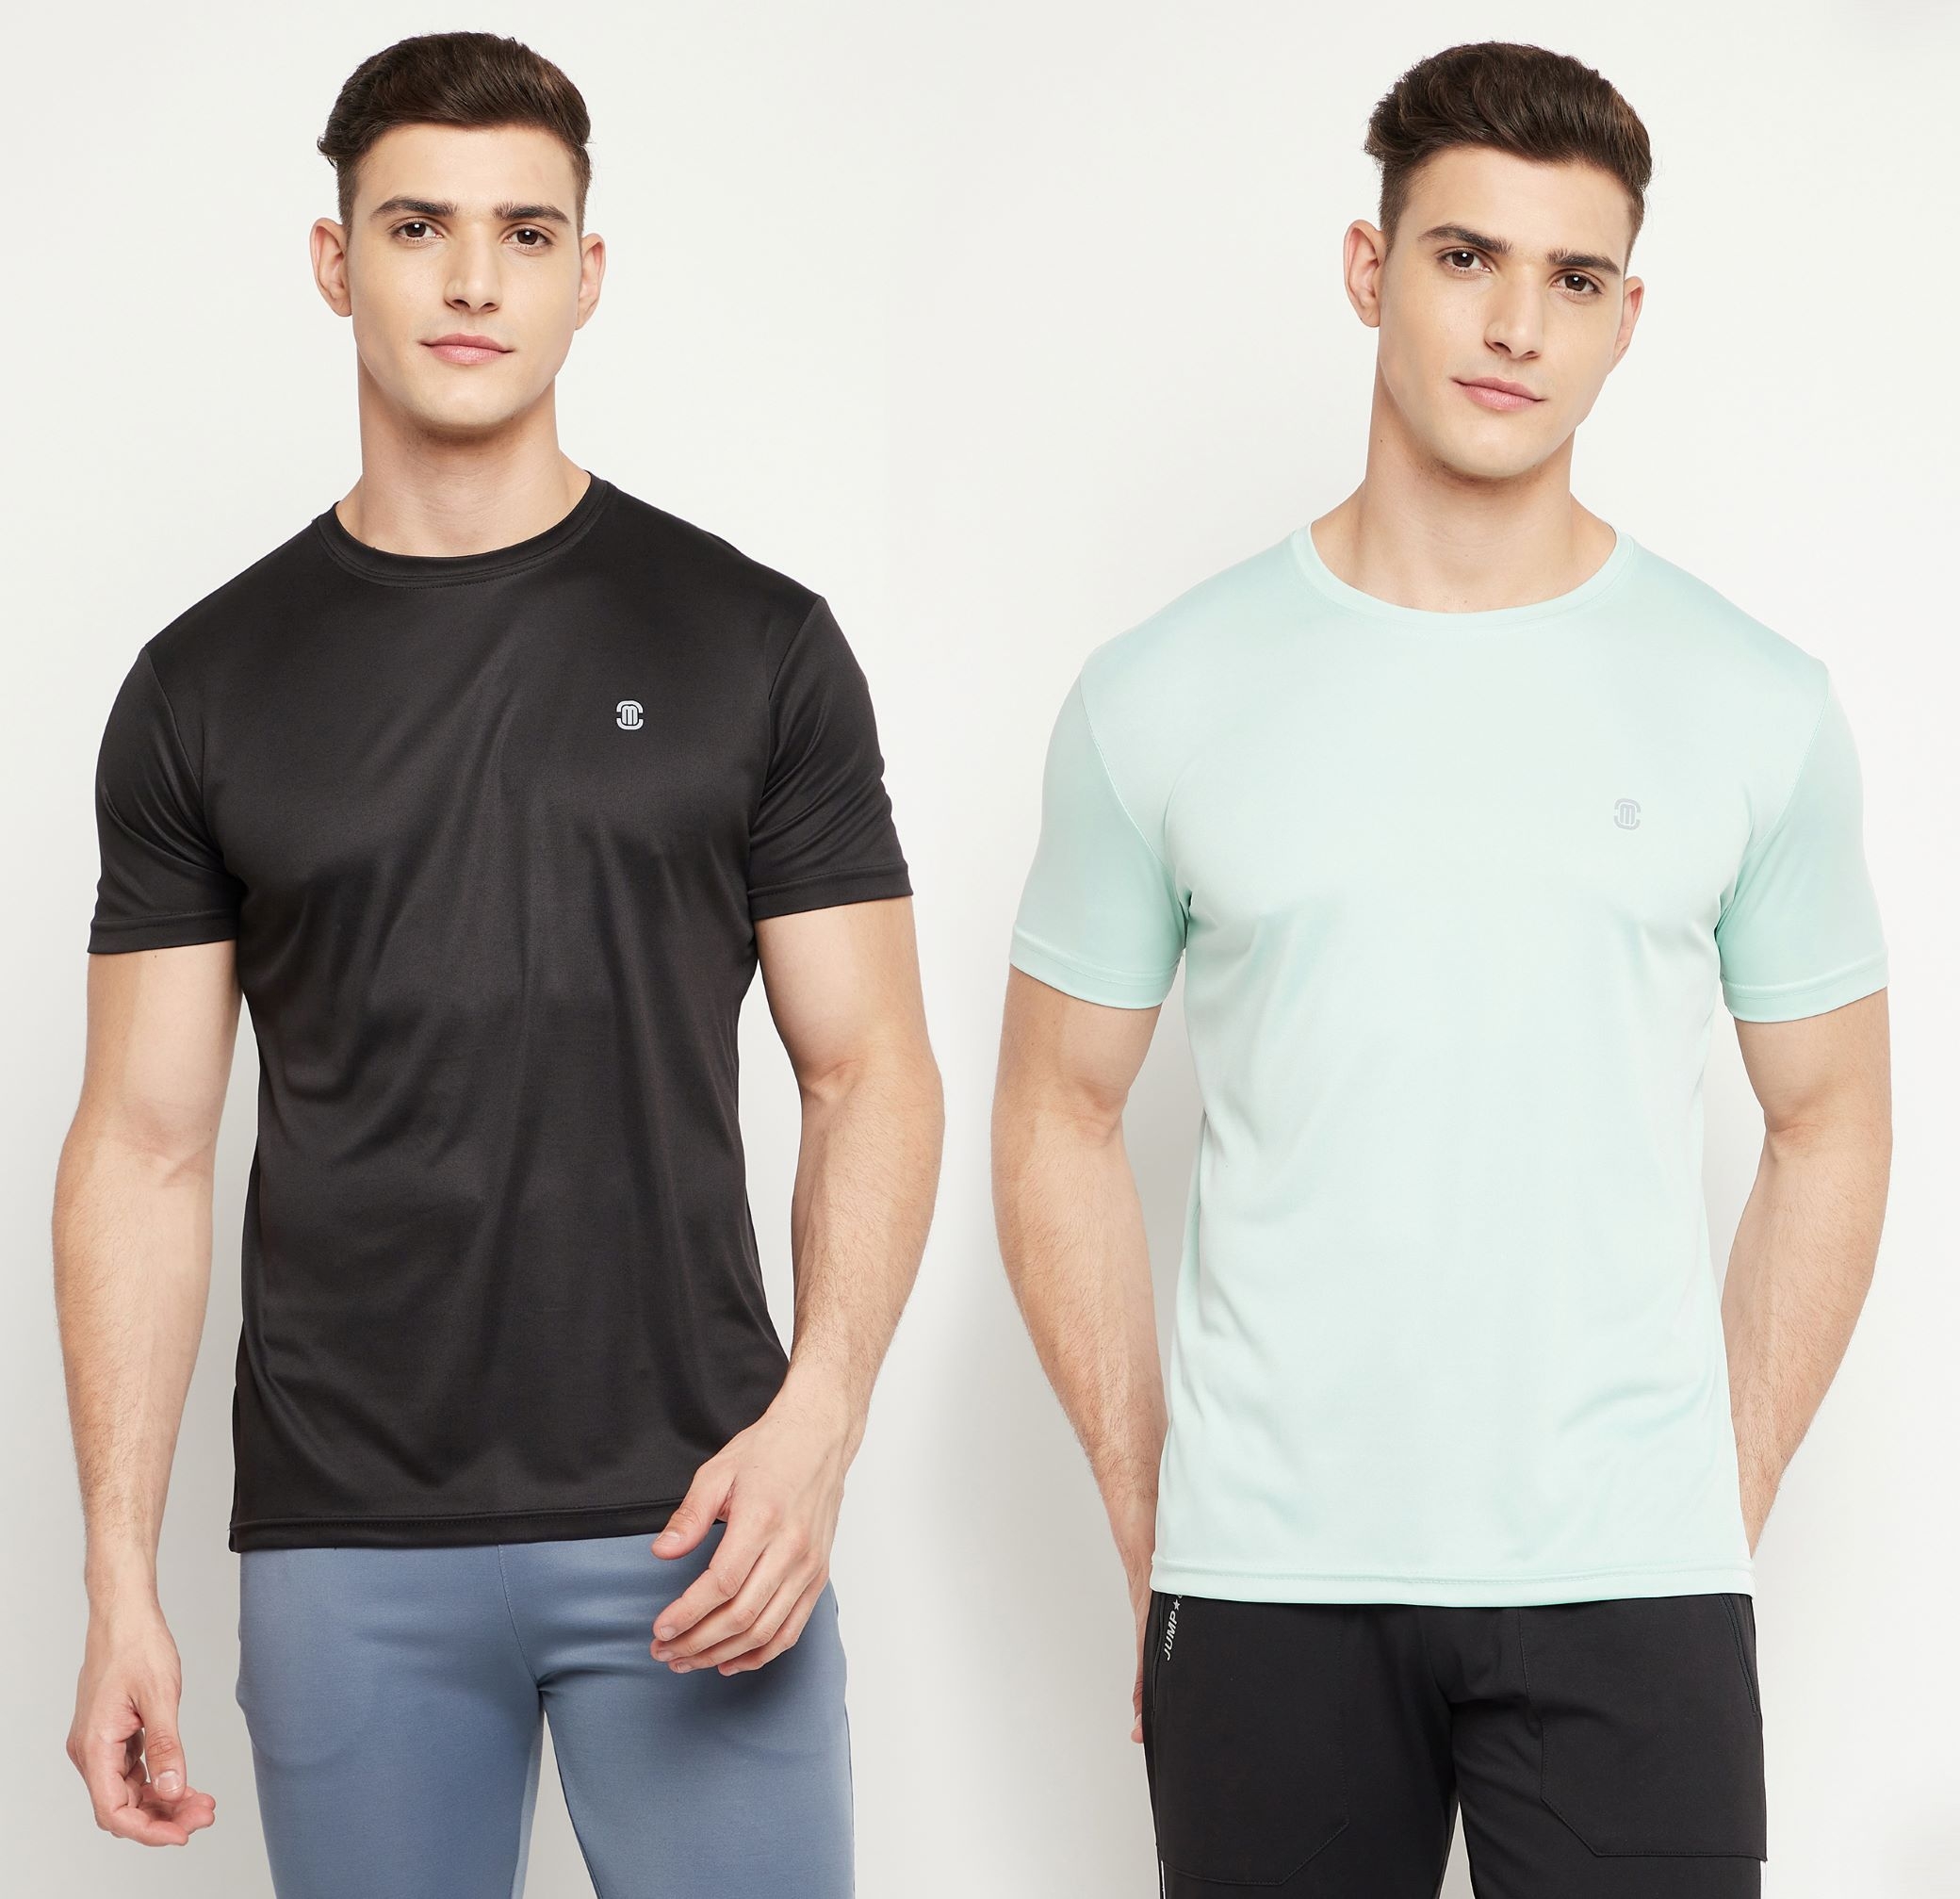 Mozafia Combo Pack of Round Neck Short Sleeves Sportswear T-shirt For Men